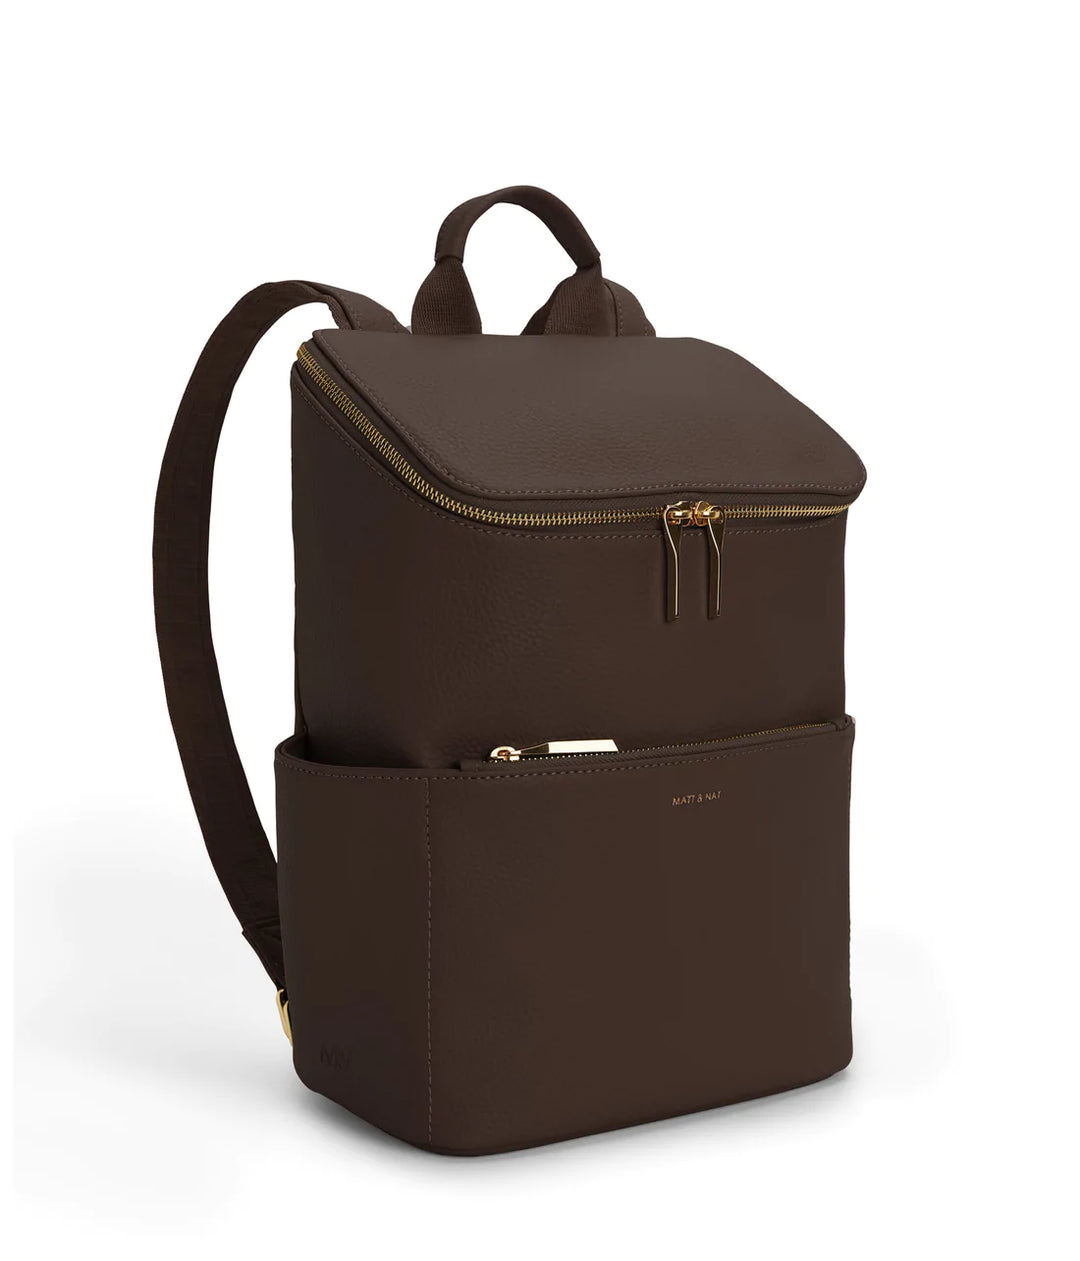 Brave Backpack - Purity Chocolate